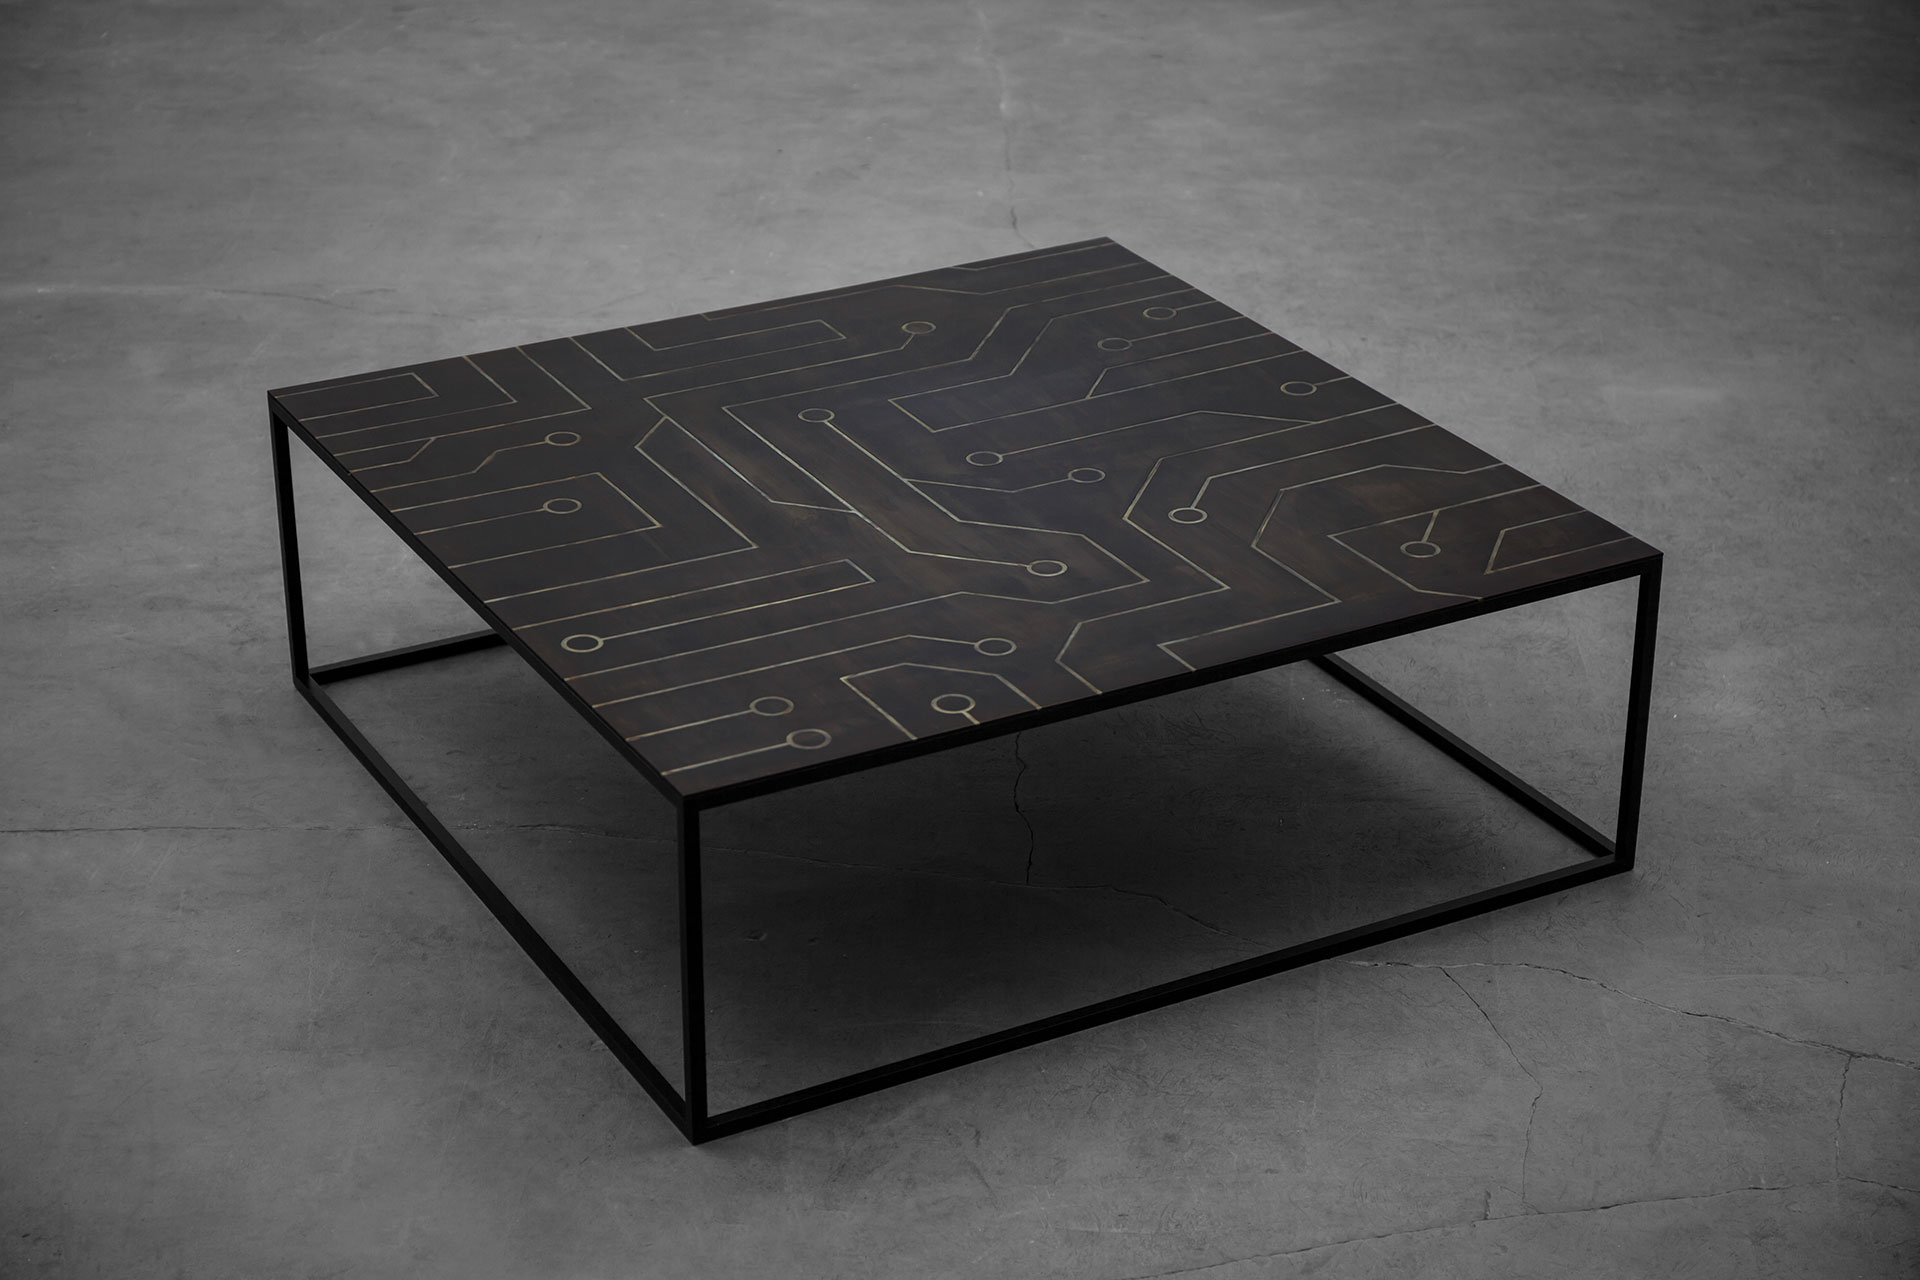 Futuristic design coffee table inspired by integrated circuit